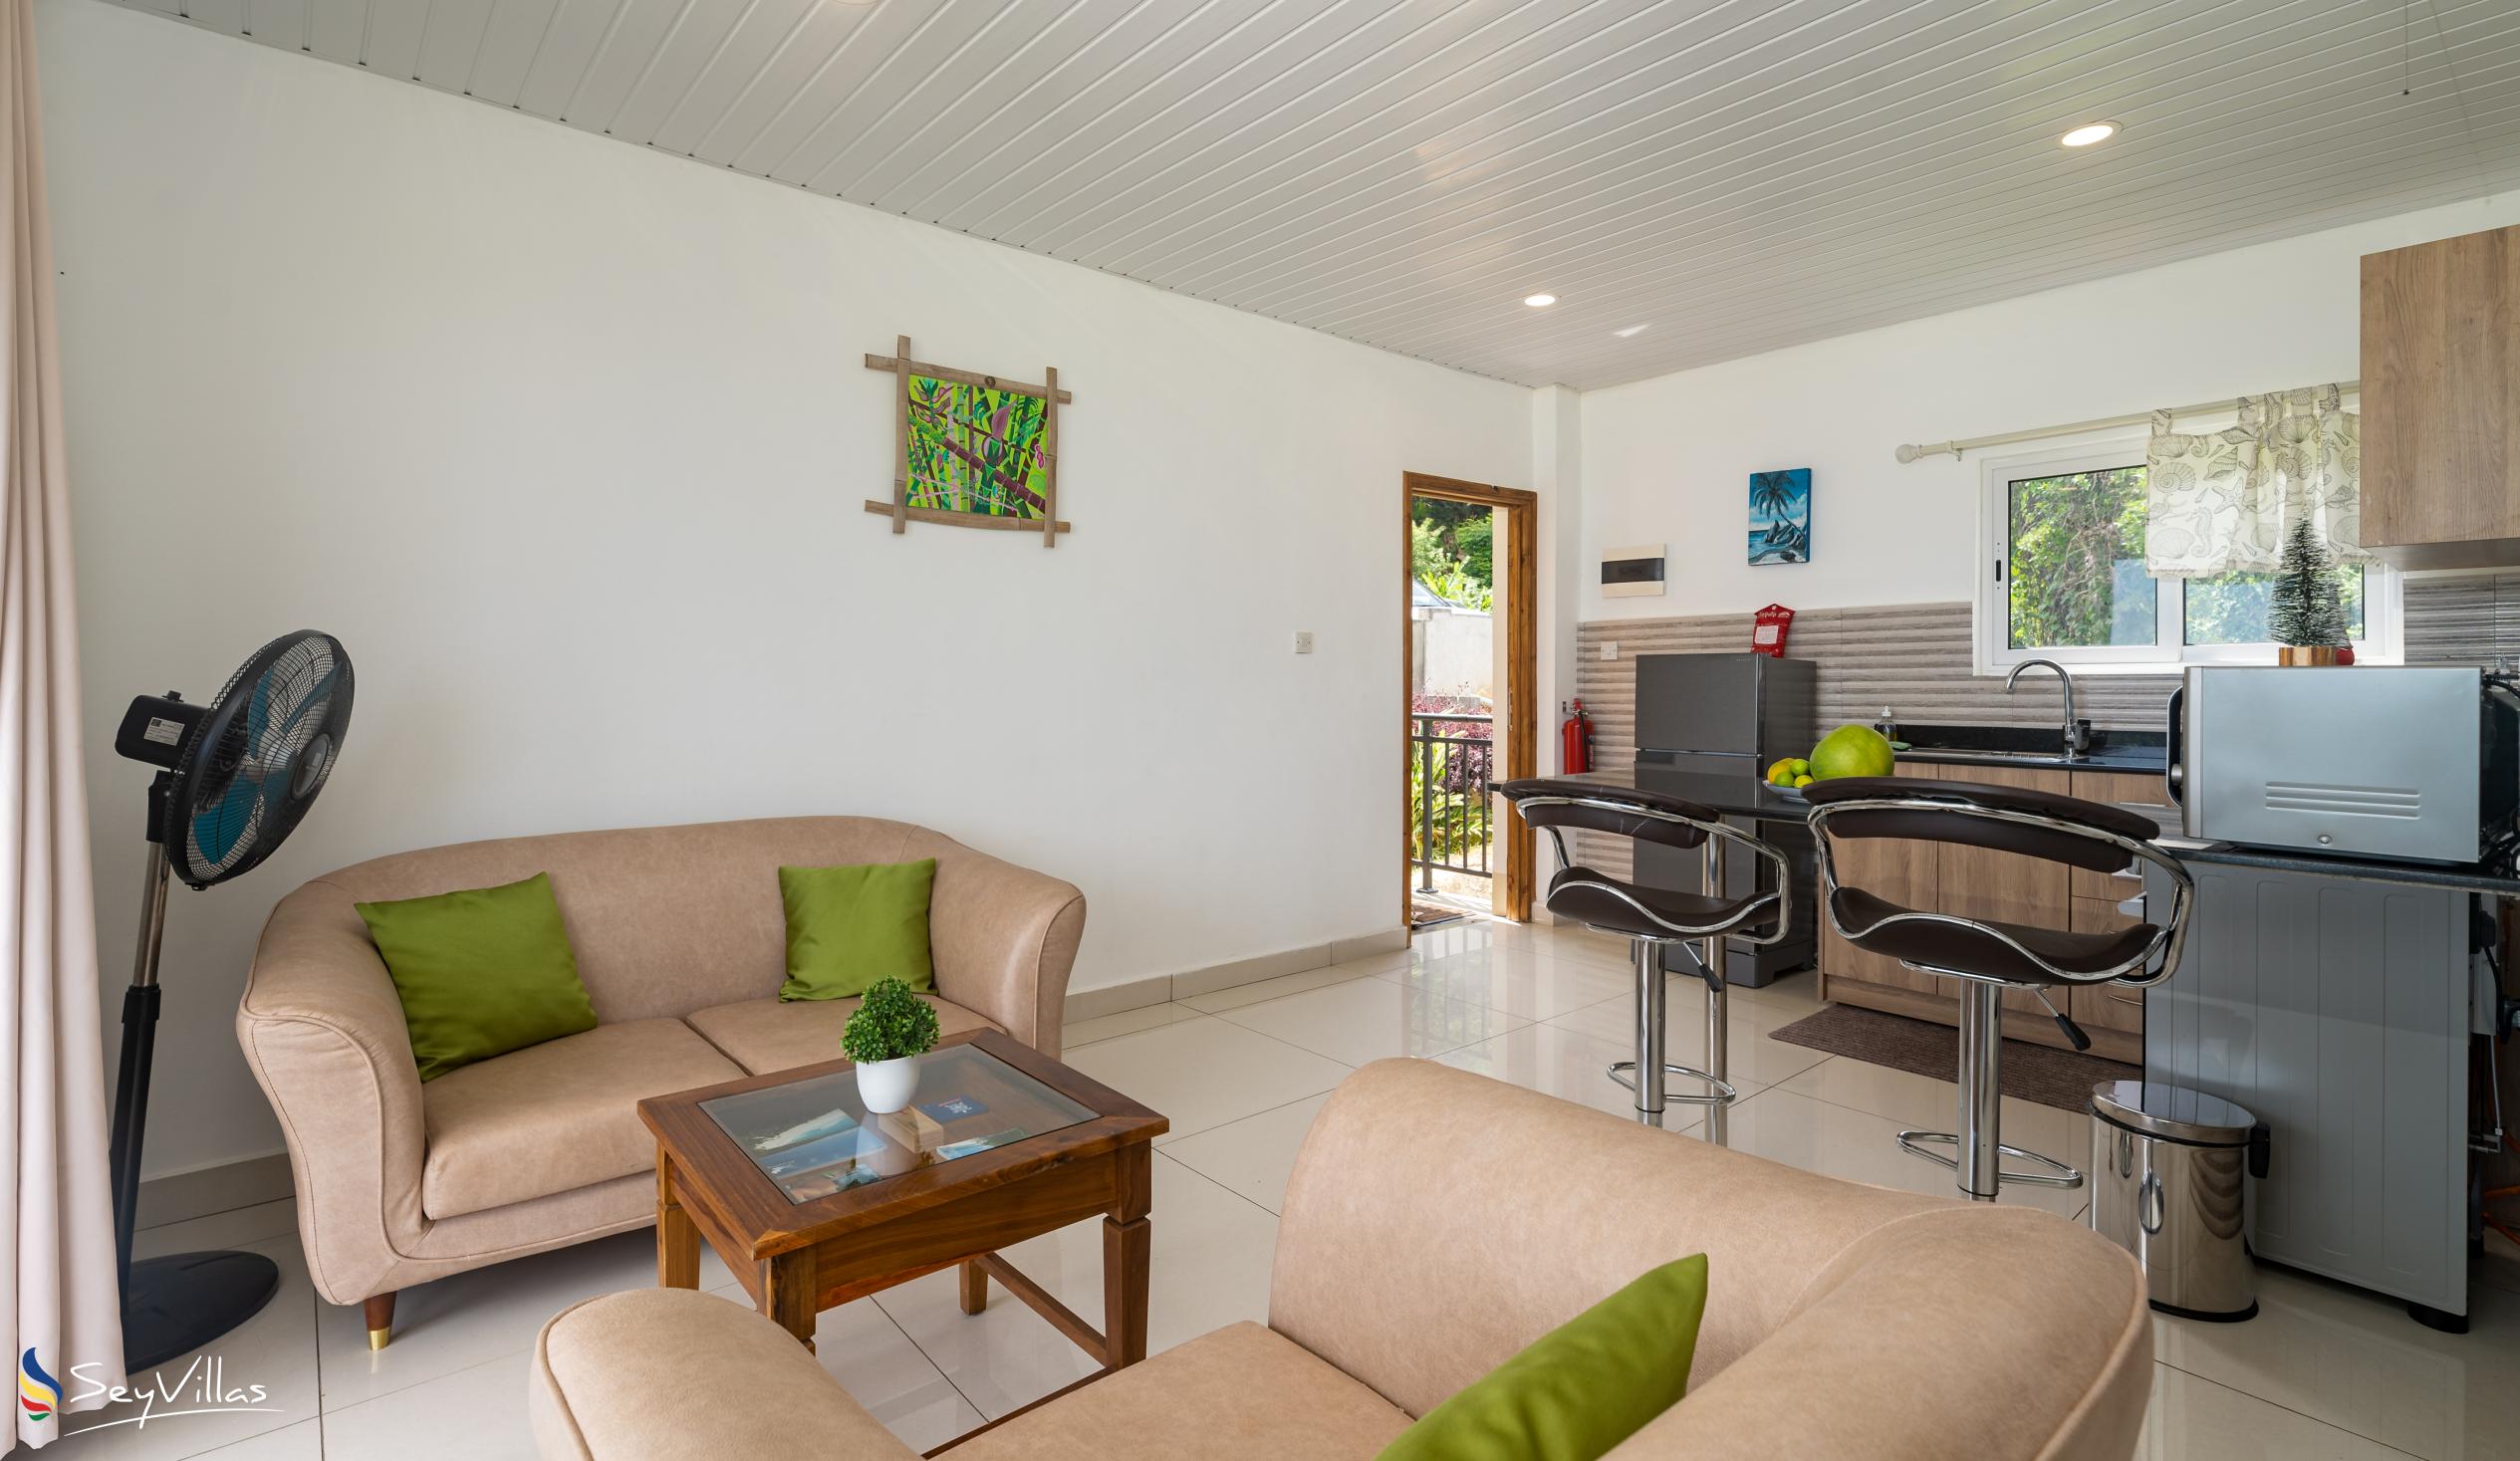 Photo 54: Creole Pearl Self Catering - 1-Bedroom Apartment - Mahé (Seychelles)